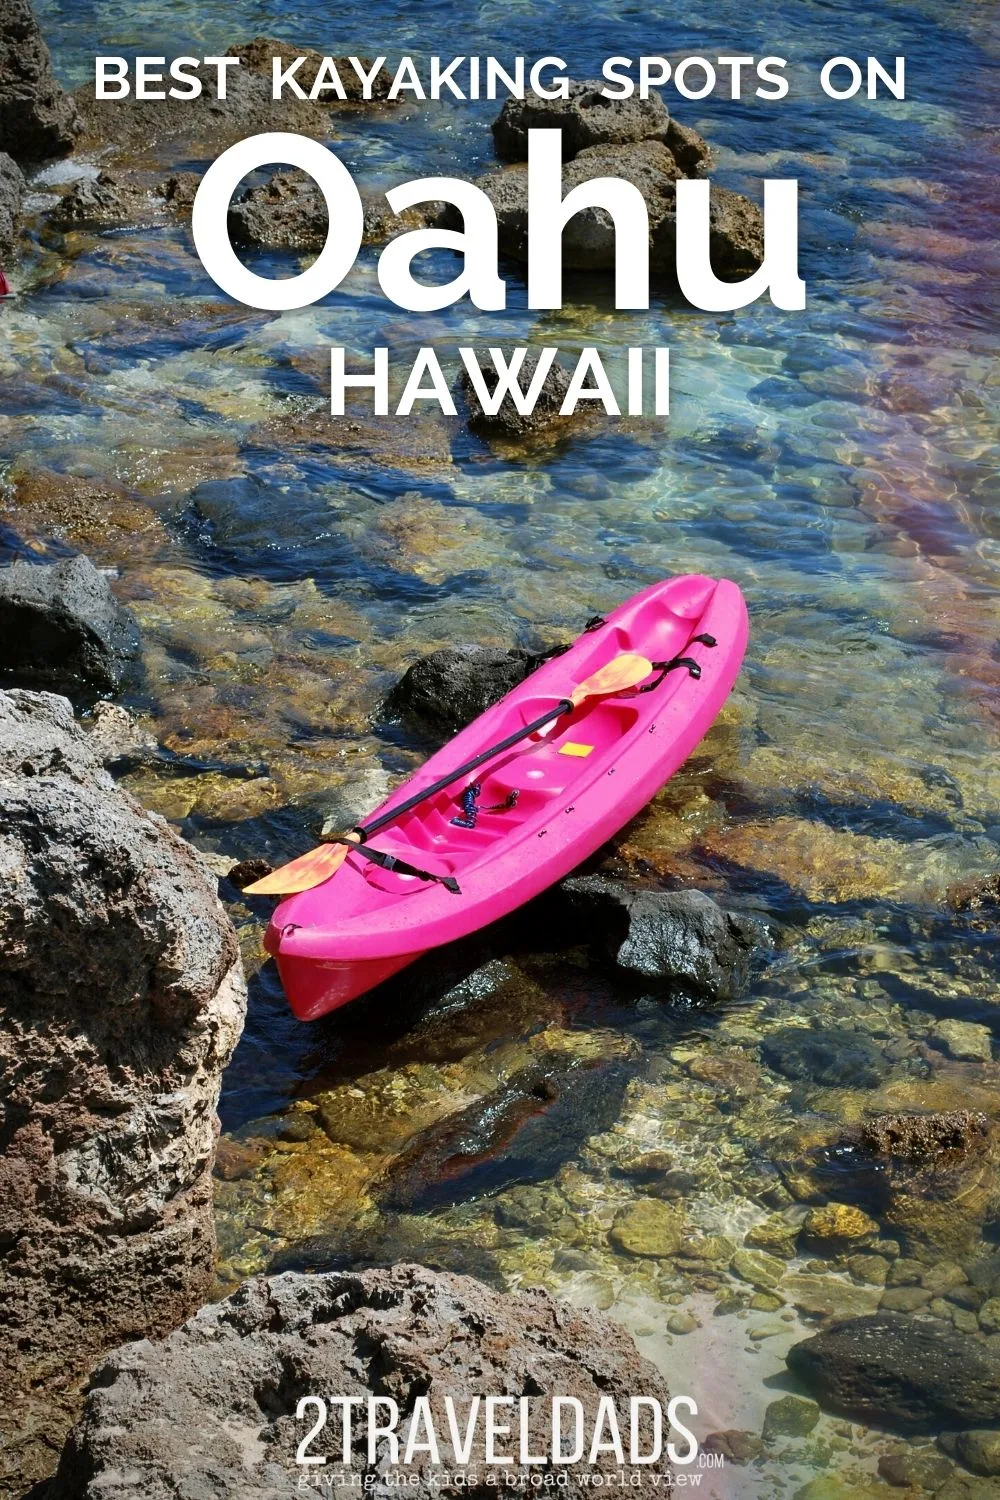 Kayaking on Oahu is a very different sort of way to experience the island. Hawaiian green sea turtles, islands just off shore and streams flowing inland are some of our highlights for paddling Oahu.